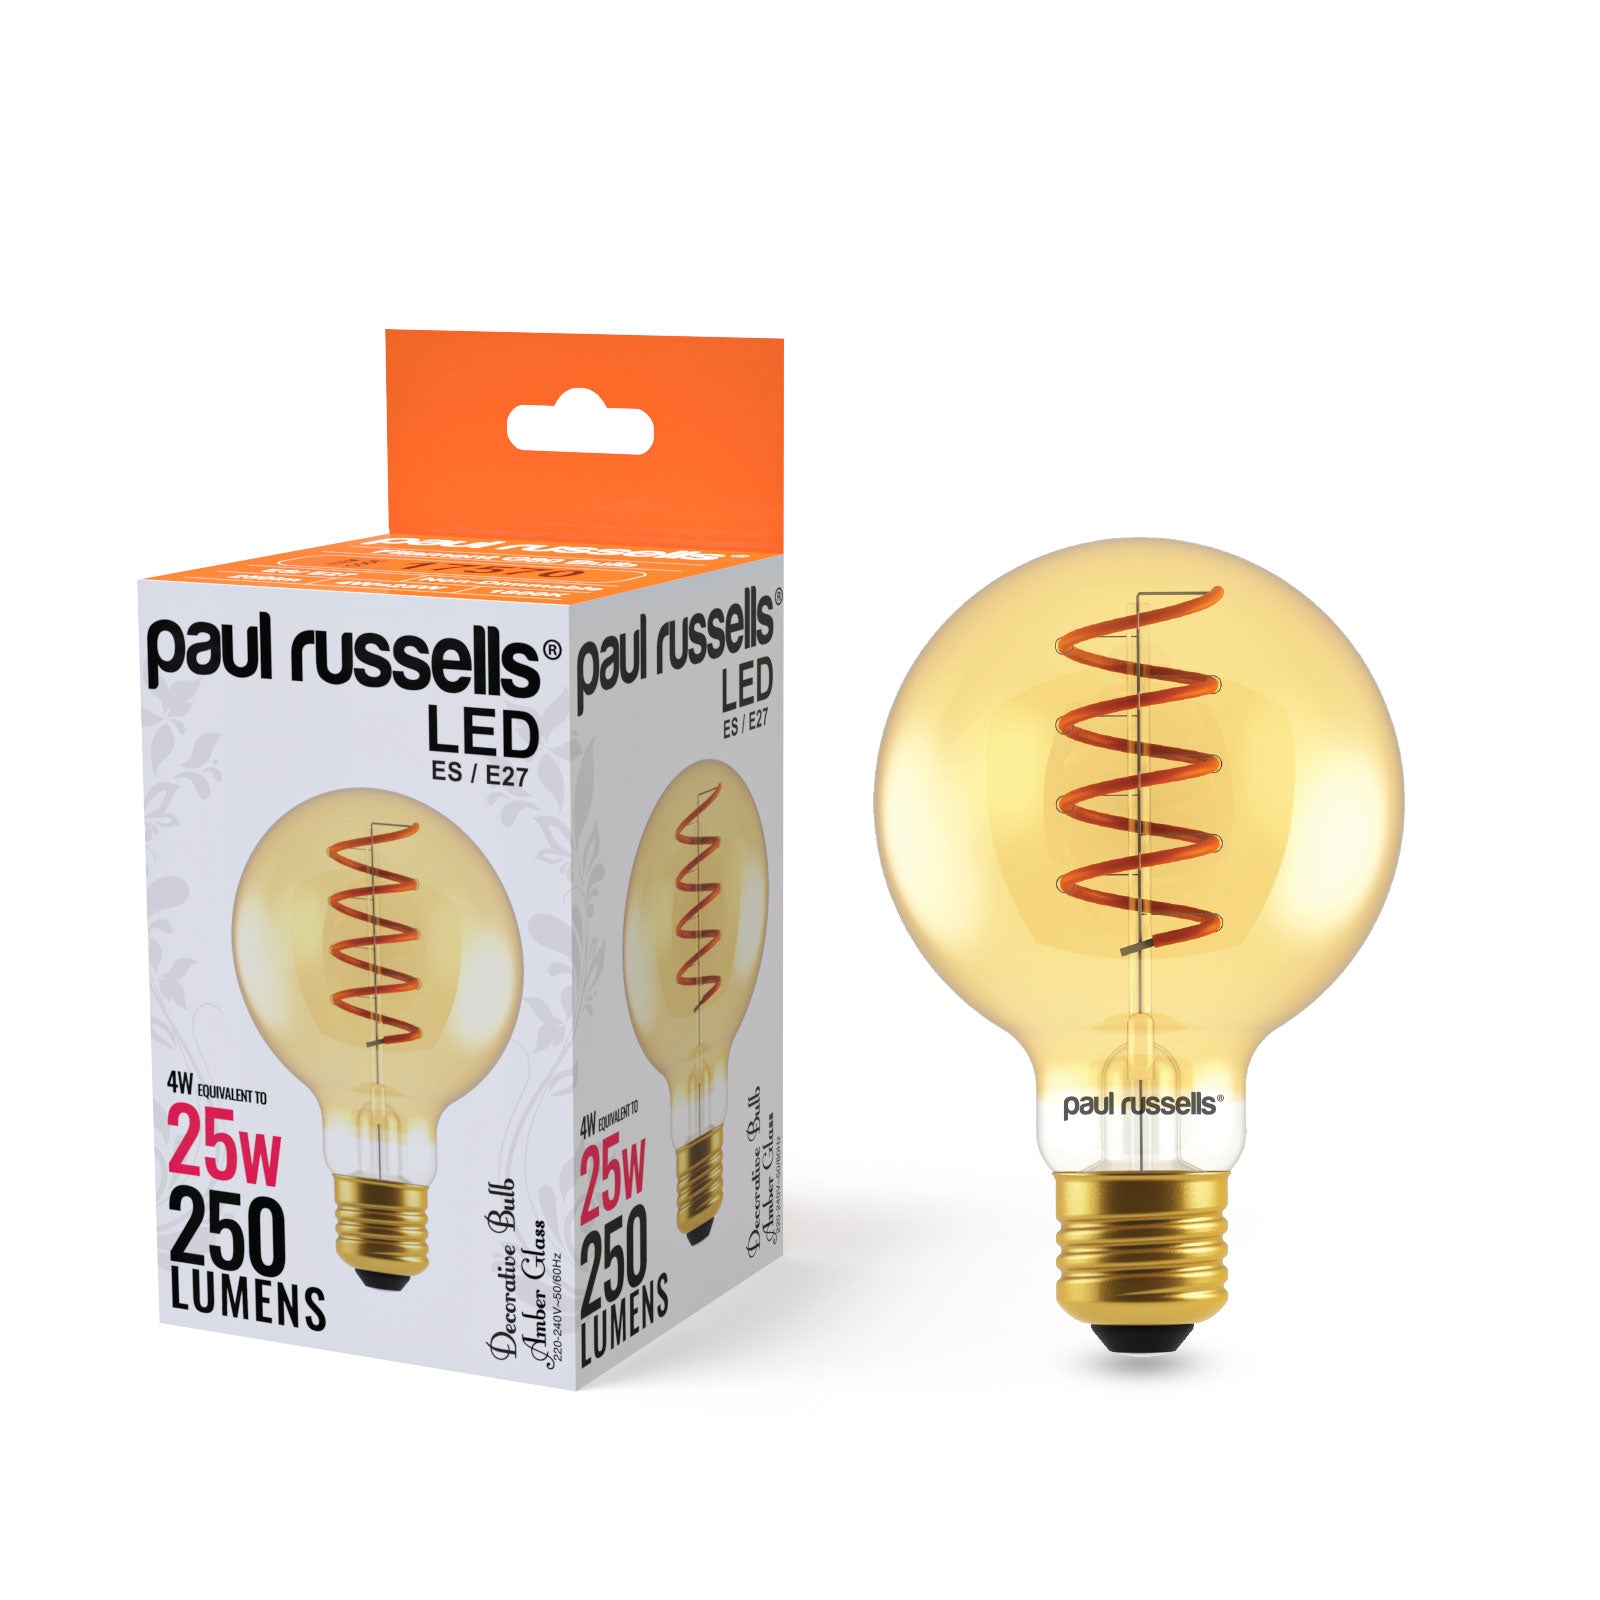 LED Filament Spiral G80 4W=25w Extra Warm White (AMBER) ES E27 Edison –  paul russells